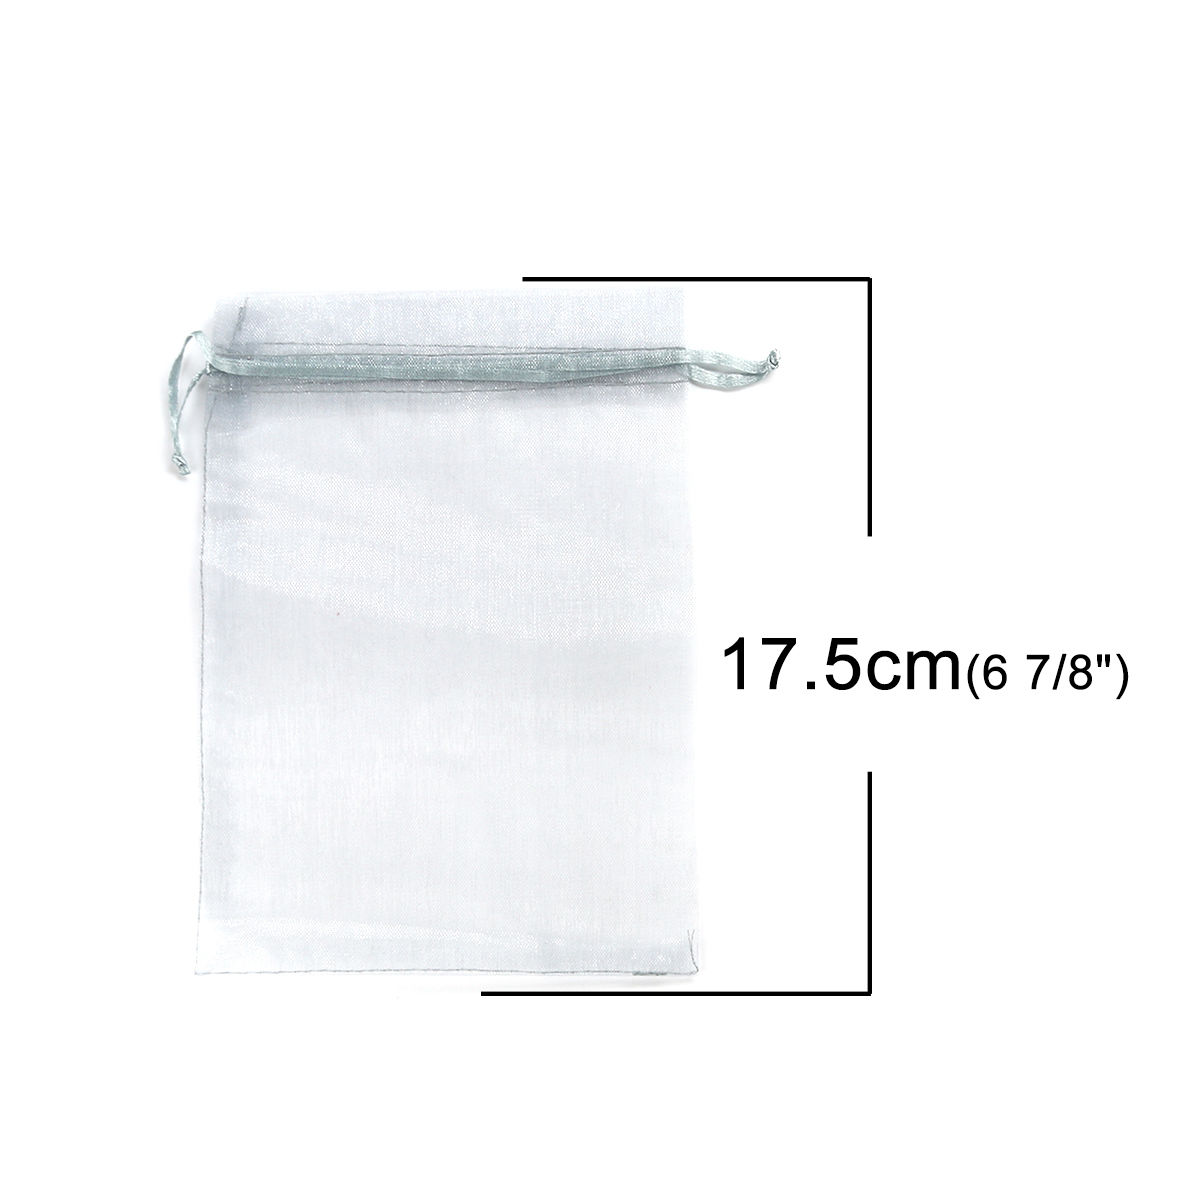 Picture of Wedding Gift Organza Jewelry Bags Drawstring Rectangle Gray (Usable Space: 15.5x12.5cm) 17.5cm x 12.8cm, 20 PCs